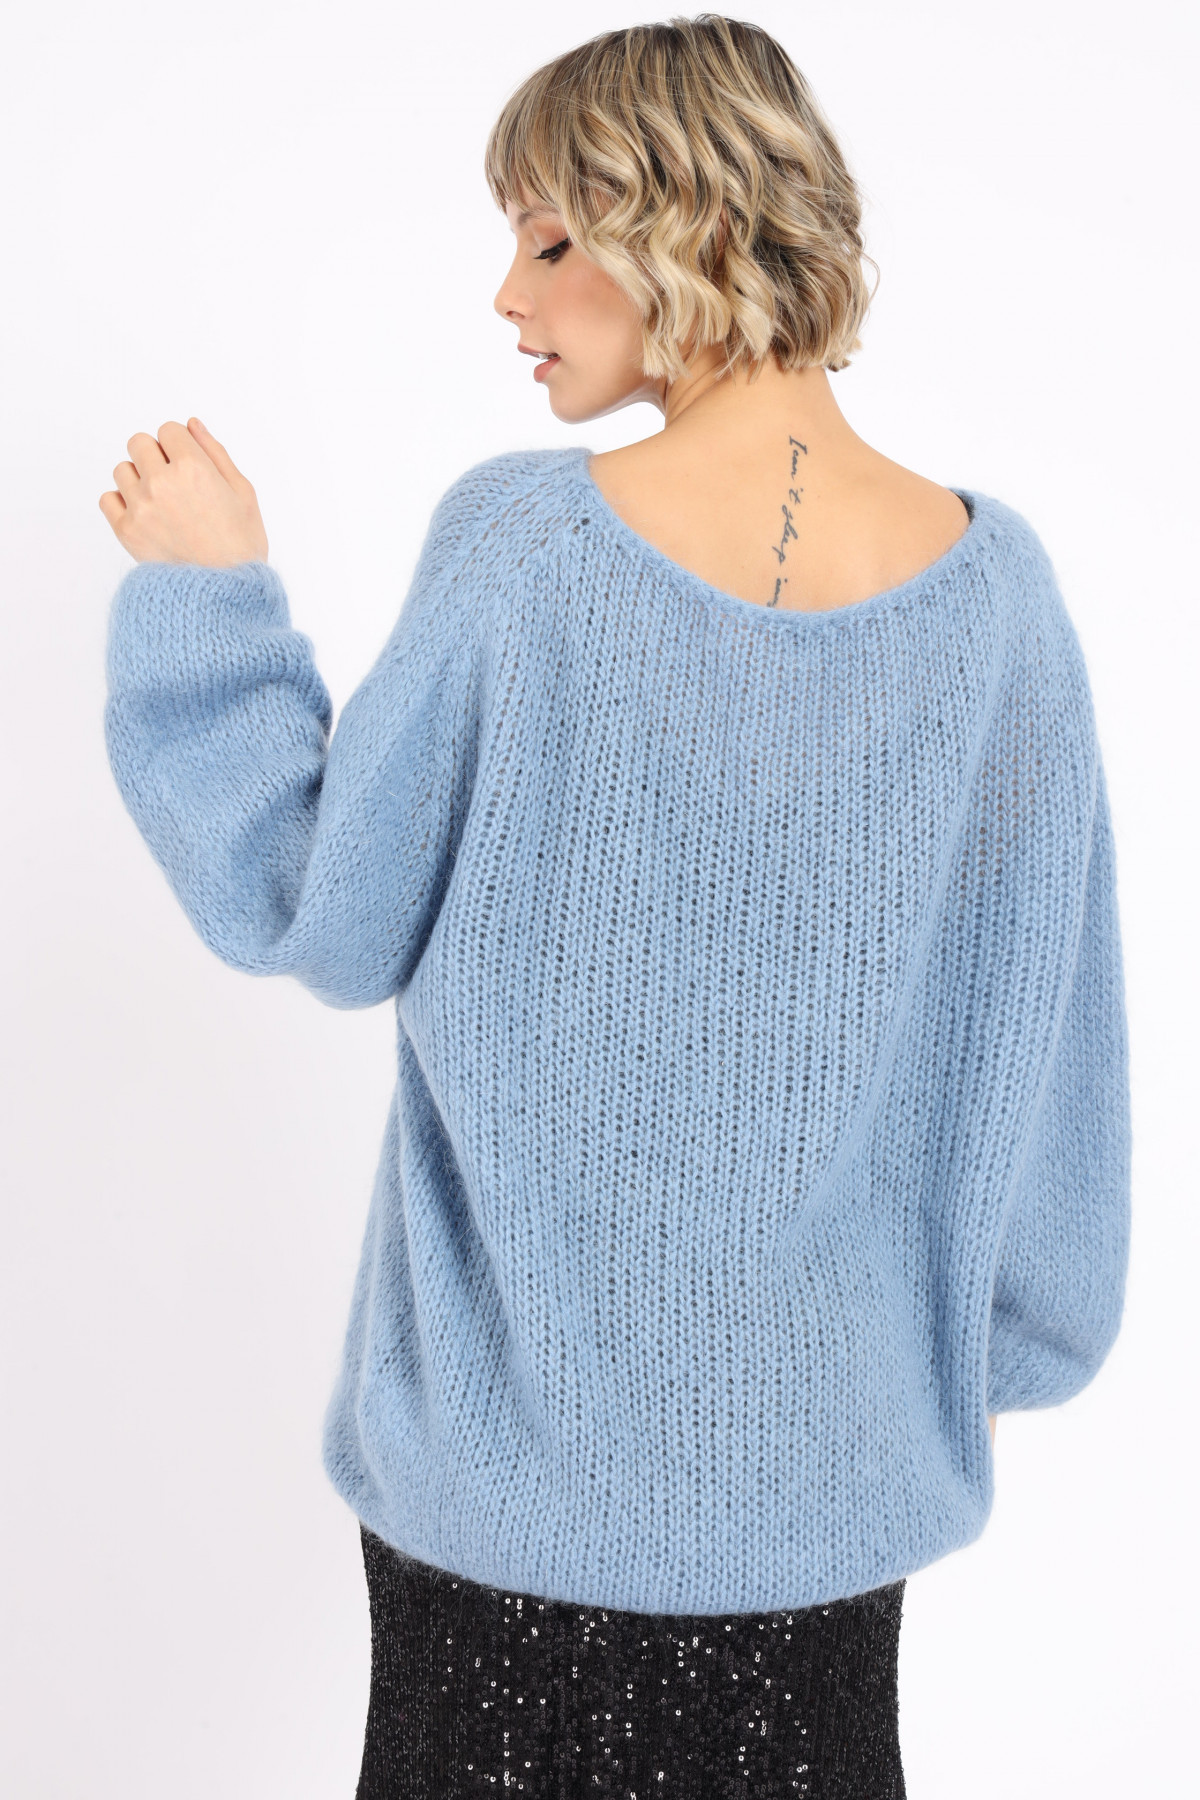 Pull Over with Boat Neckline